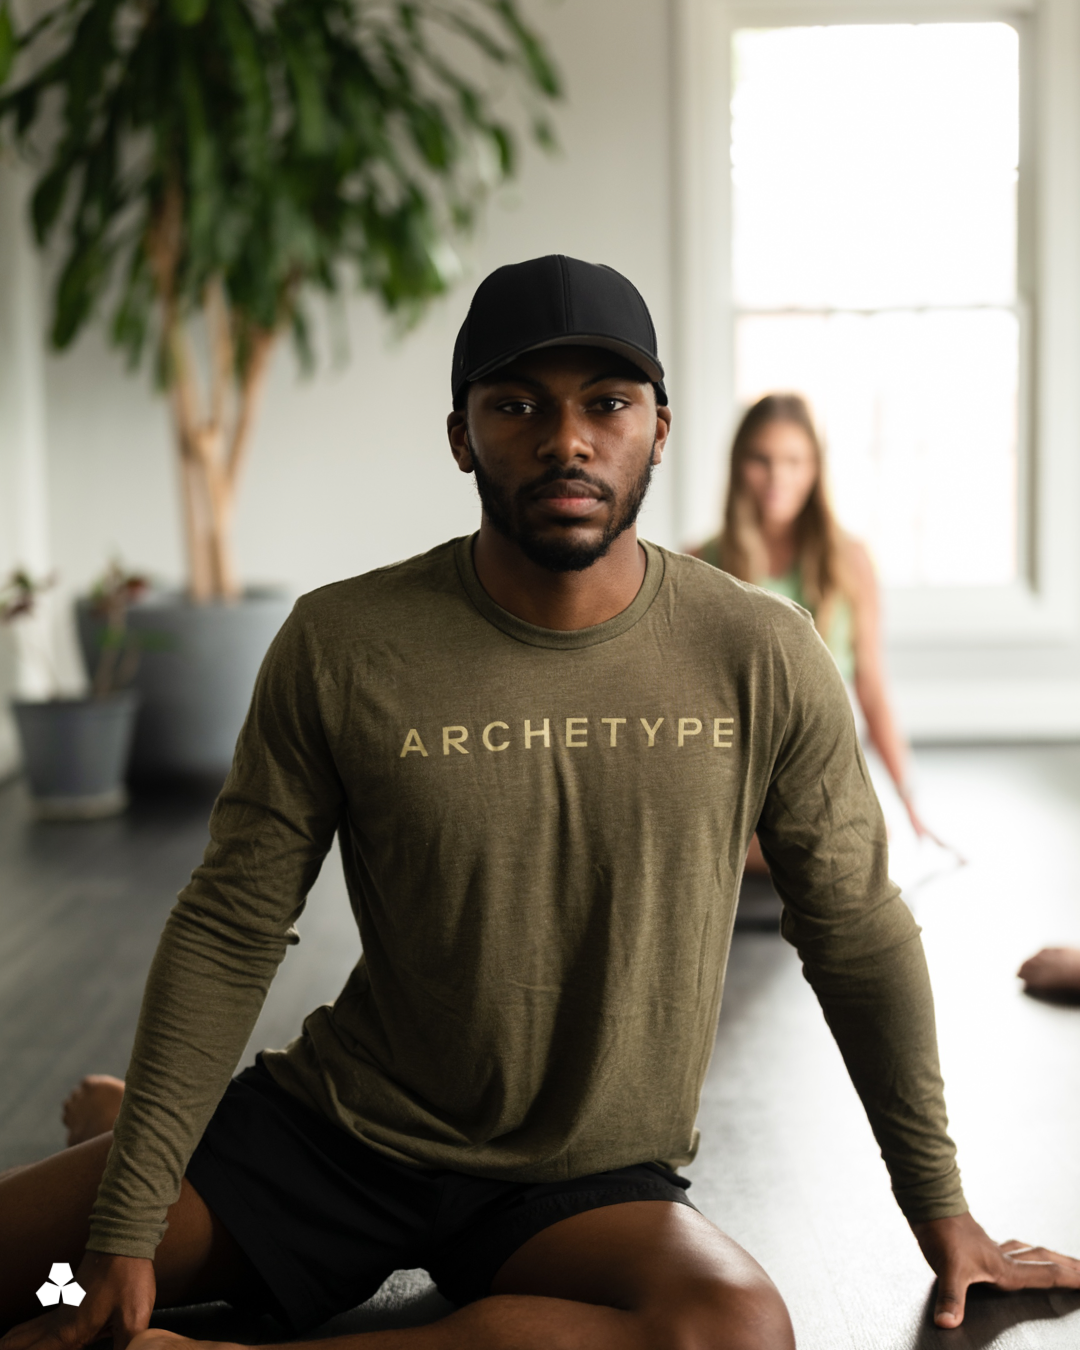 Are You a Gym? No But Archetype Can Fix Your Broken Movement Patterns